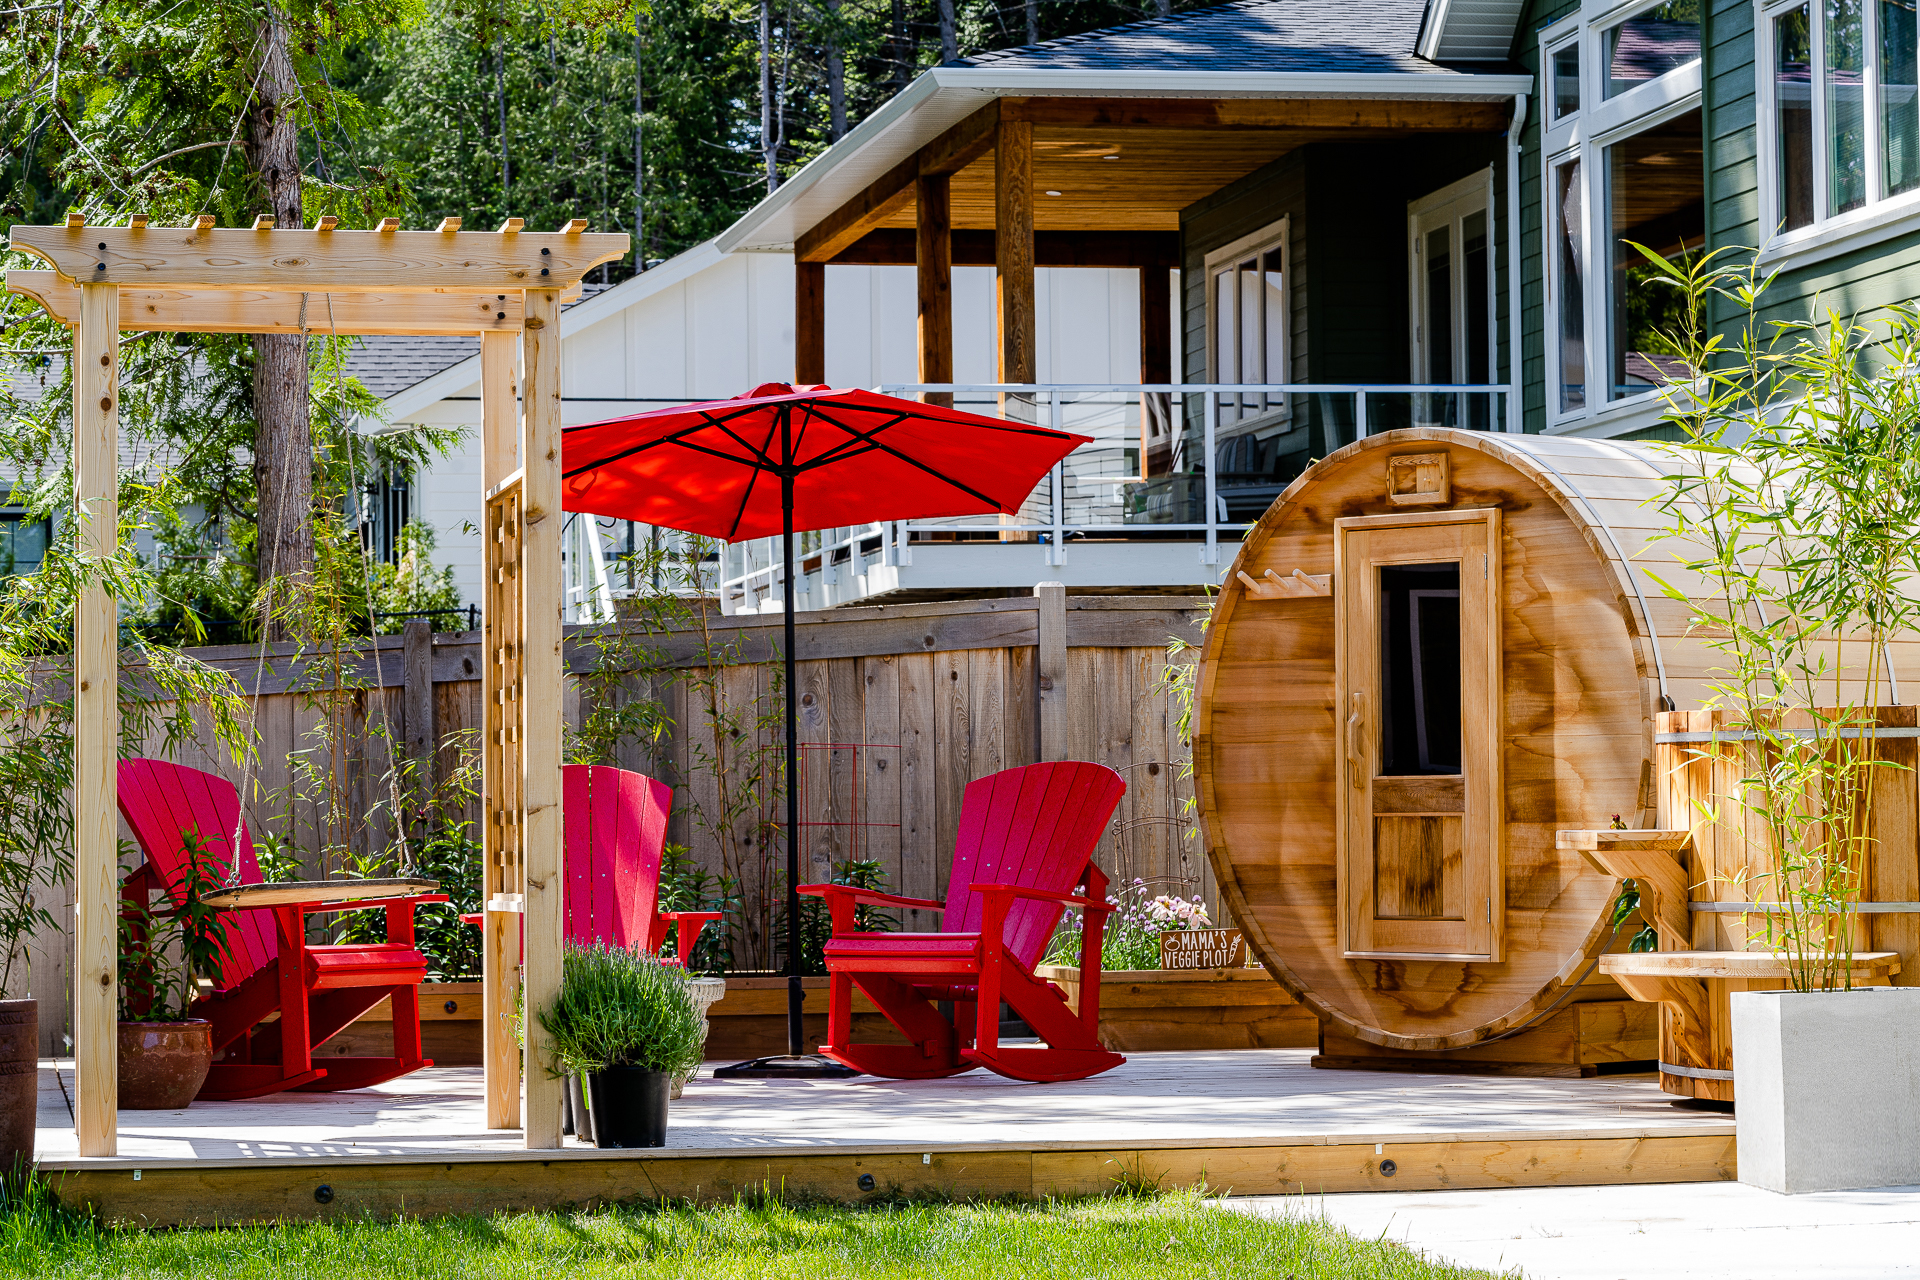 A beautifully designed backyard showcasing a cedar barrel sauna by Forest Cooperage. The scene includes a wooden pergola, vibrant red Adirondack chairs, and a red patio umbrella, creating an inviting outdoor space. This setup highlights the premium quality and aesthetic appeal of the cedar barrel sauna, ideal for relaxation and enhancing modern outdoor living.